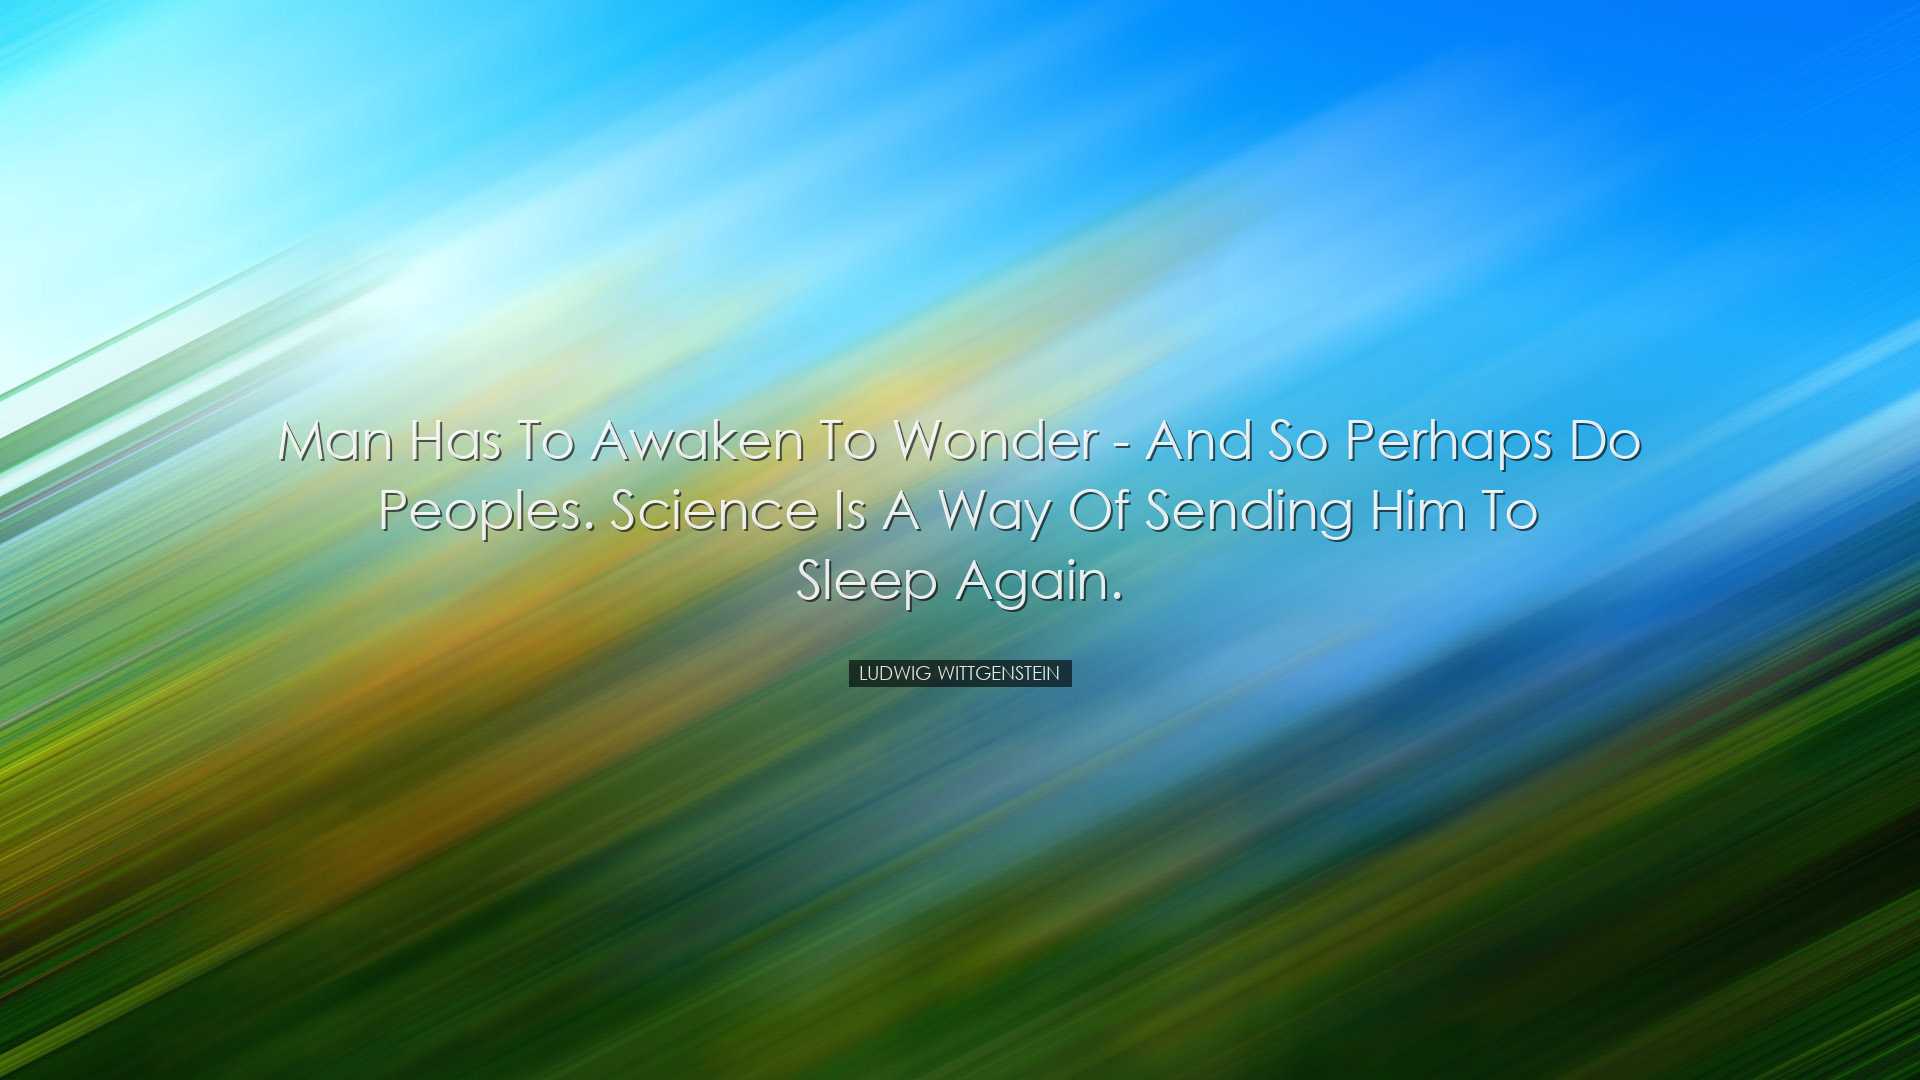 Man has to awaken to wonder - and so perhaps do peoples. Science i